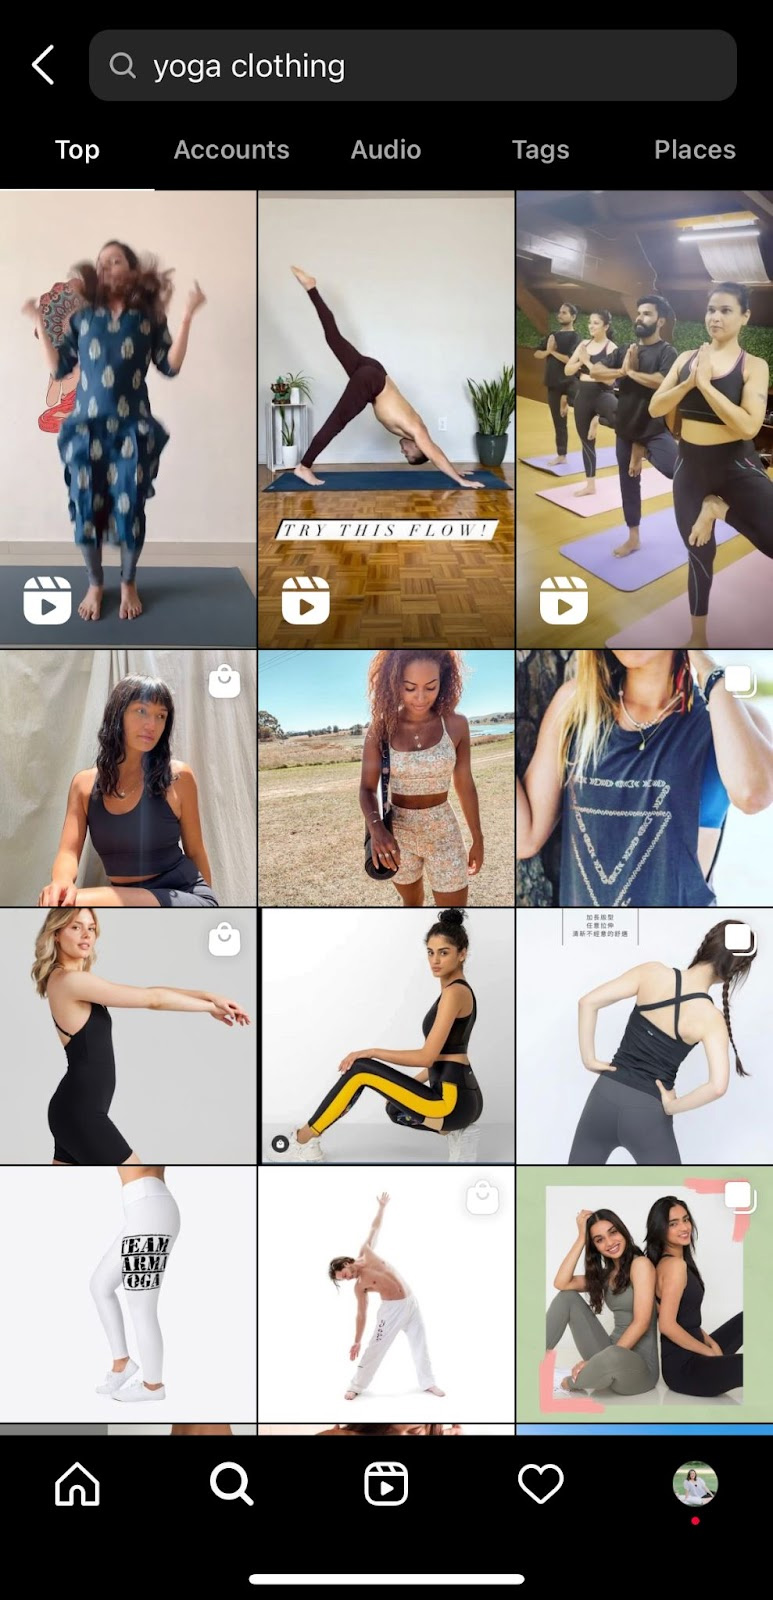 Instagram sample search result about yoga clothing.